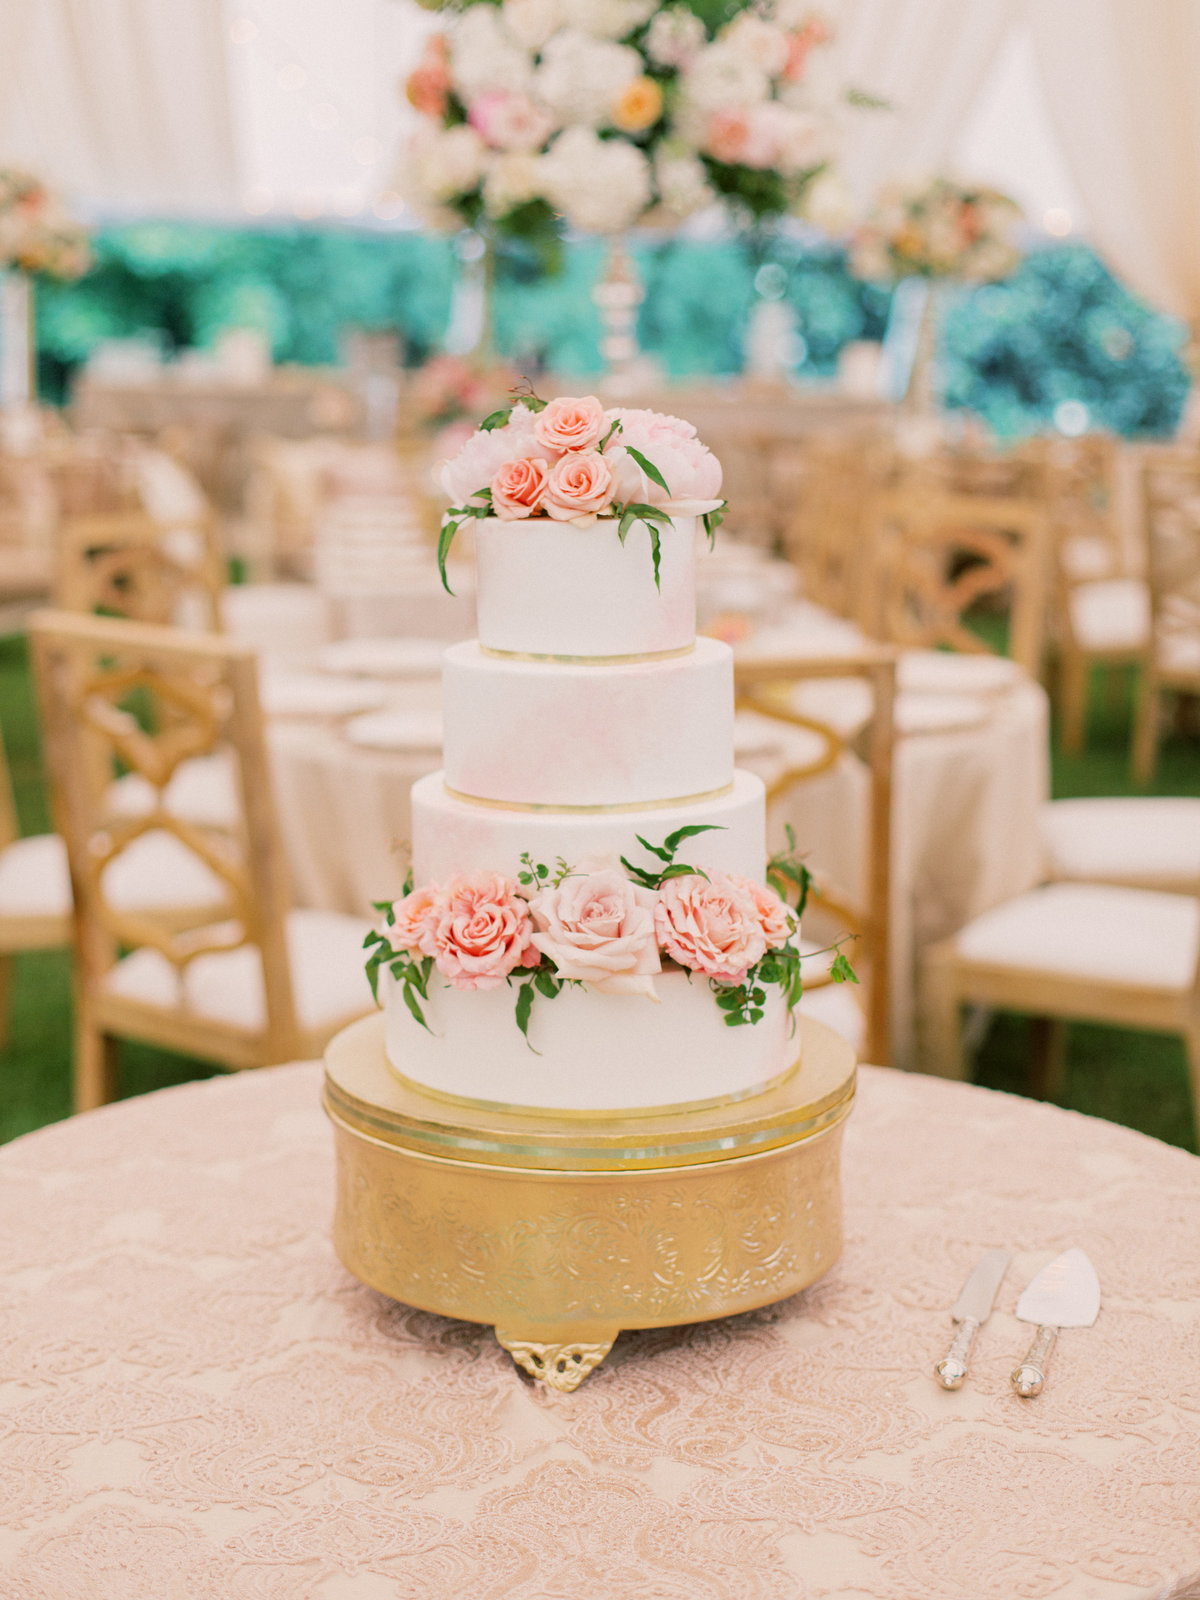 2019-06-08Carrie&MikeWedding-56